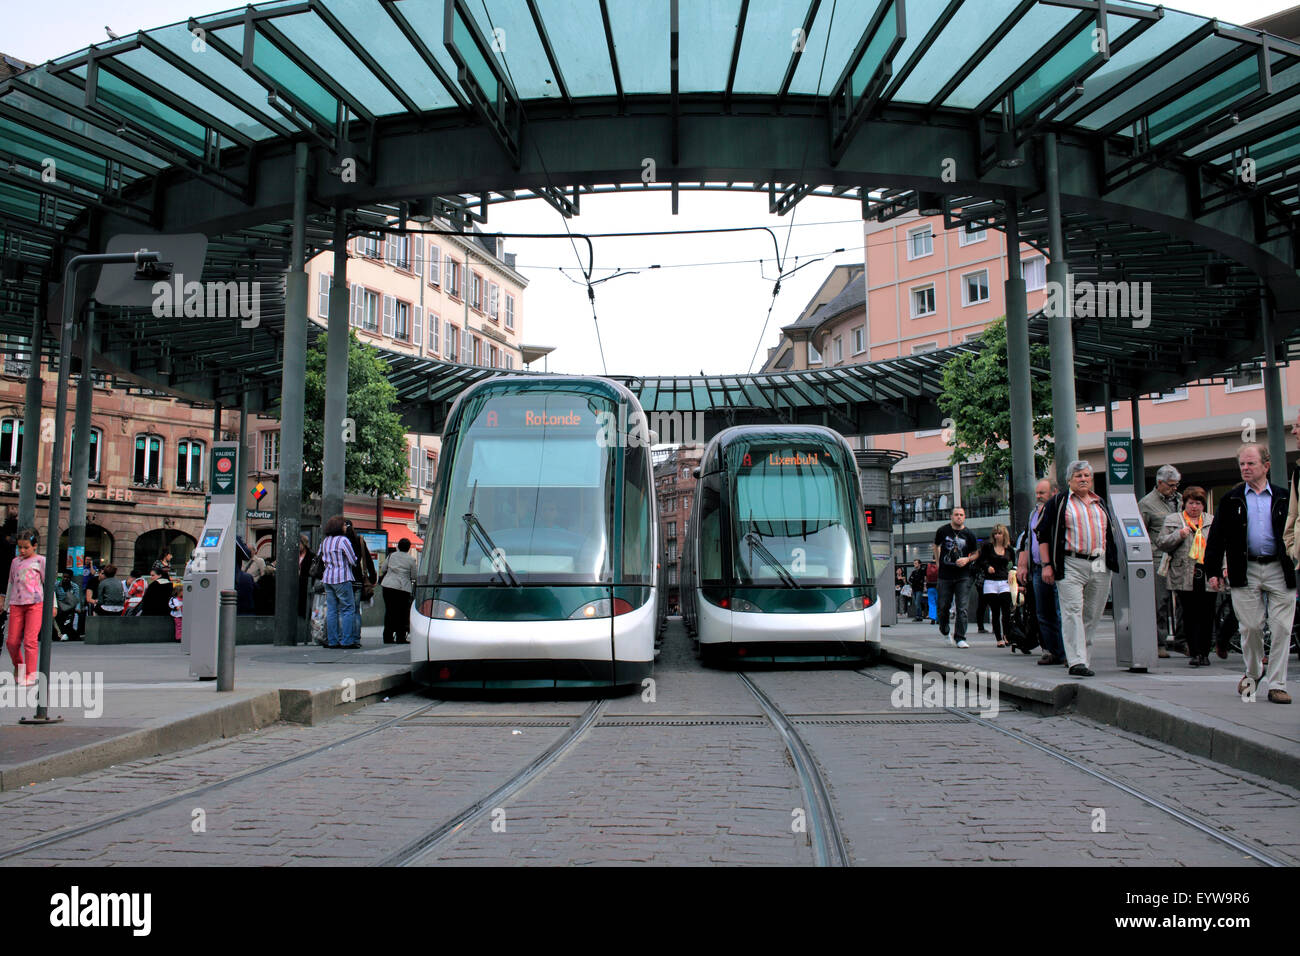 Tram stop in the Place de l'Homme de Fer in the centre of Strasbourg, France. Stock Photo